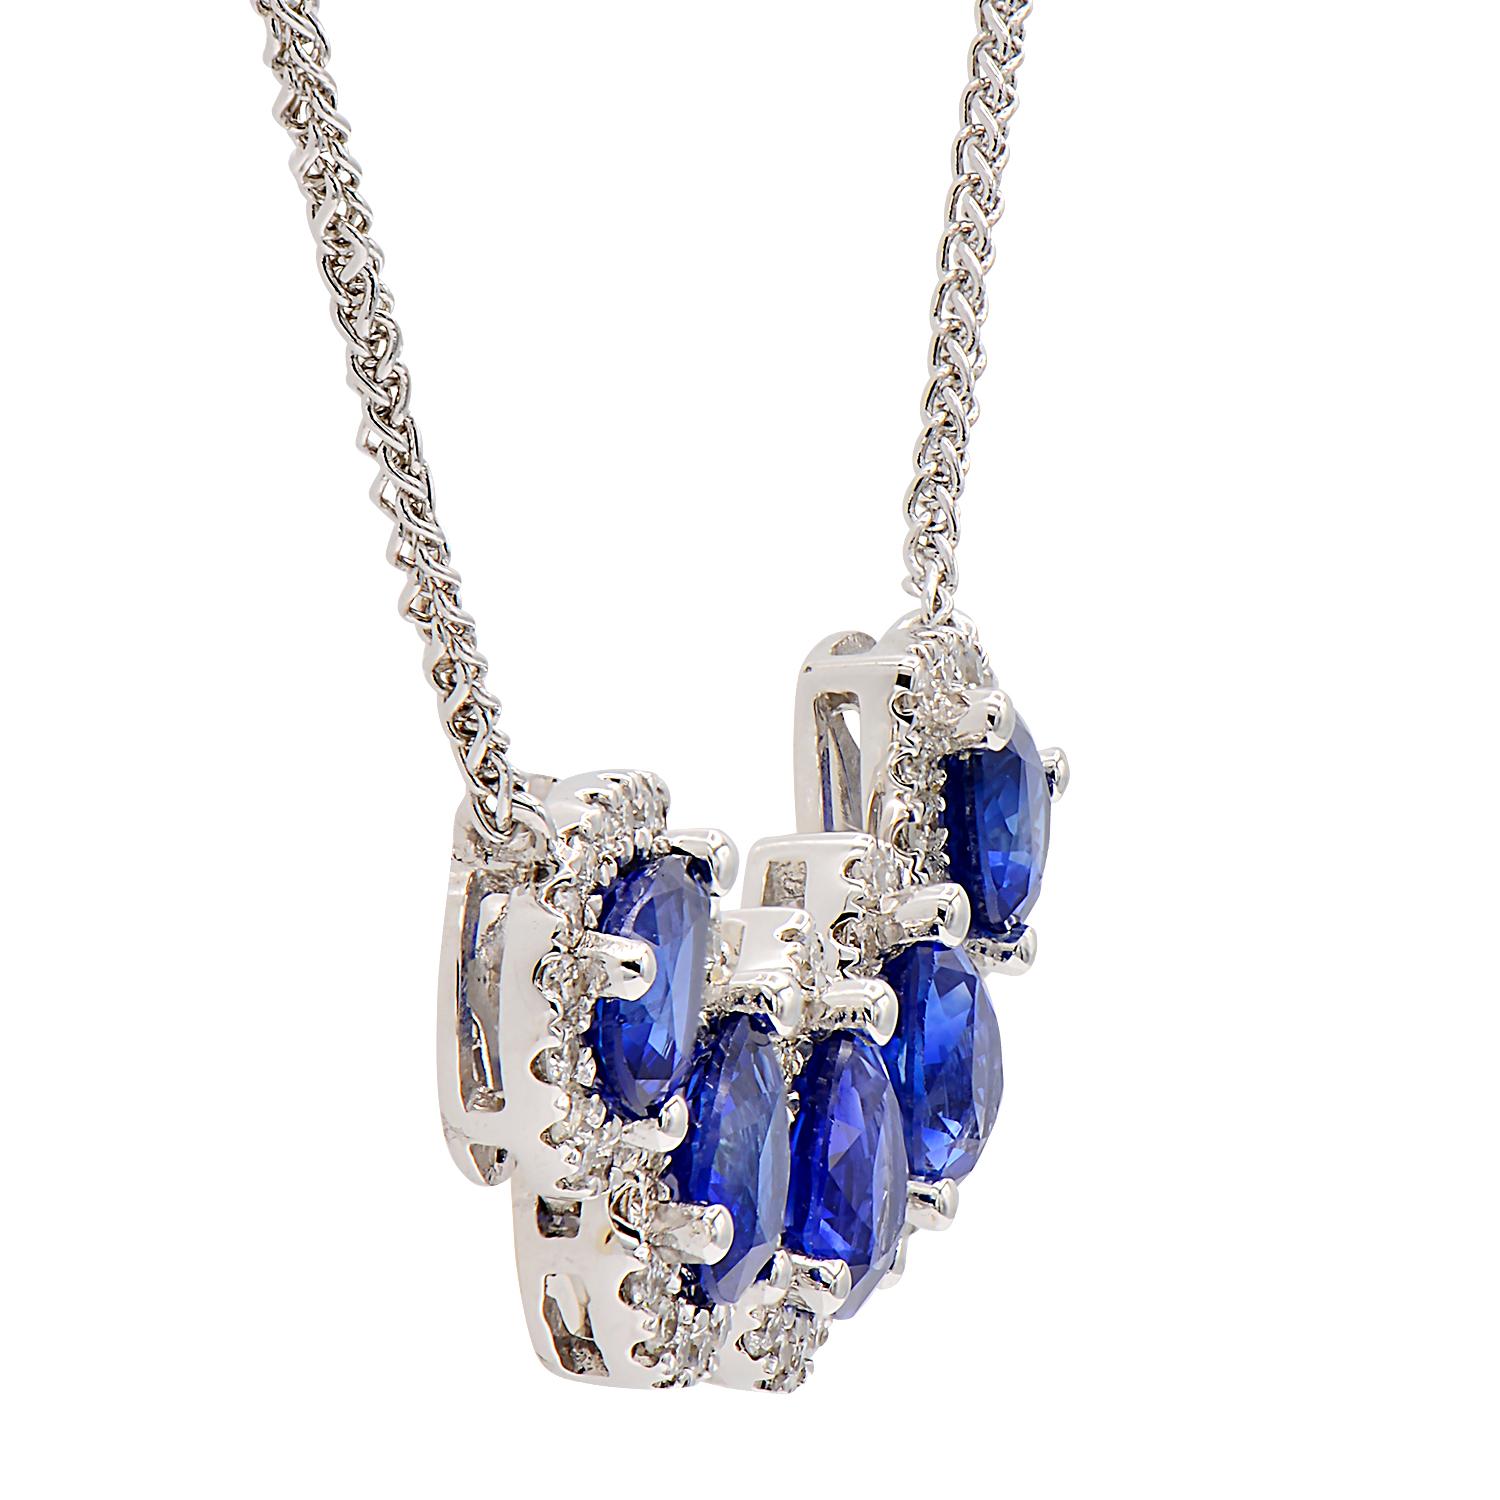 This gorgeous necklace is made from 5 blue drop shape sapphires totaling 1.89 carats which are circled by a beautiful diamond halo made from 80 round VS2, G color diamonds totaling 0.41 carats. They are set in 2.6 grams of 18 karat white gold and